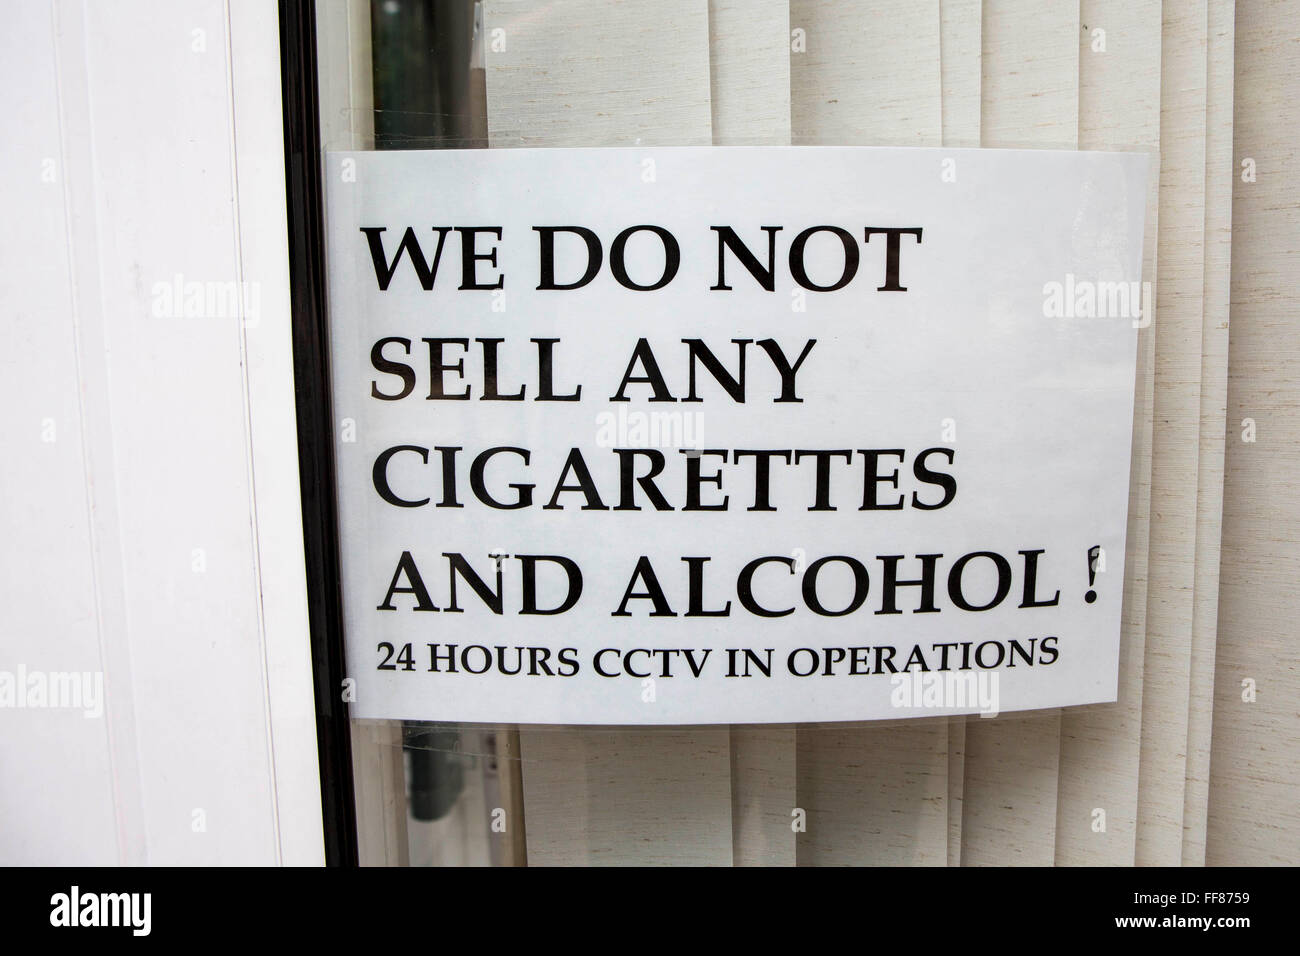 Window sign stating: We do not sell any cigarettes and alcohol! 24 hours CCTV in operation”. This is a warning sign to put potential break ins. London, UK. Stock Photo